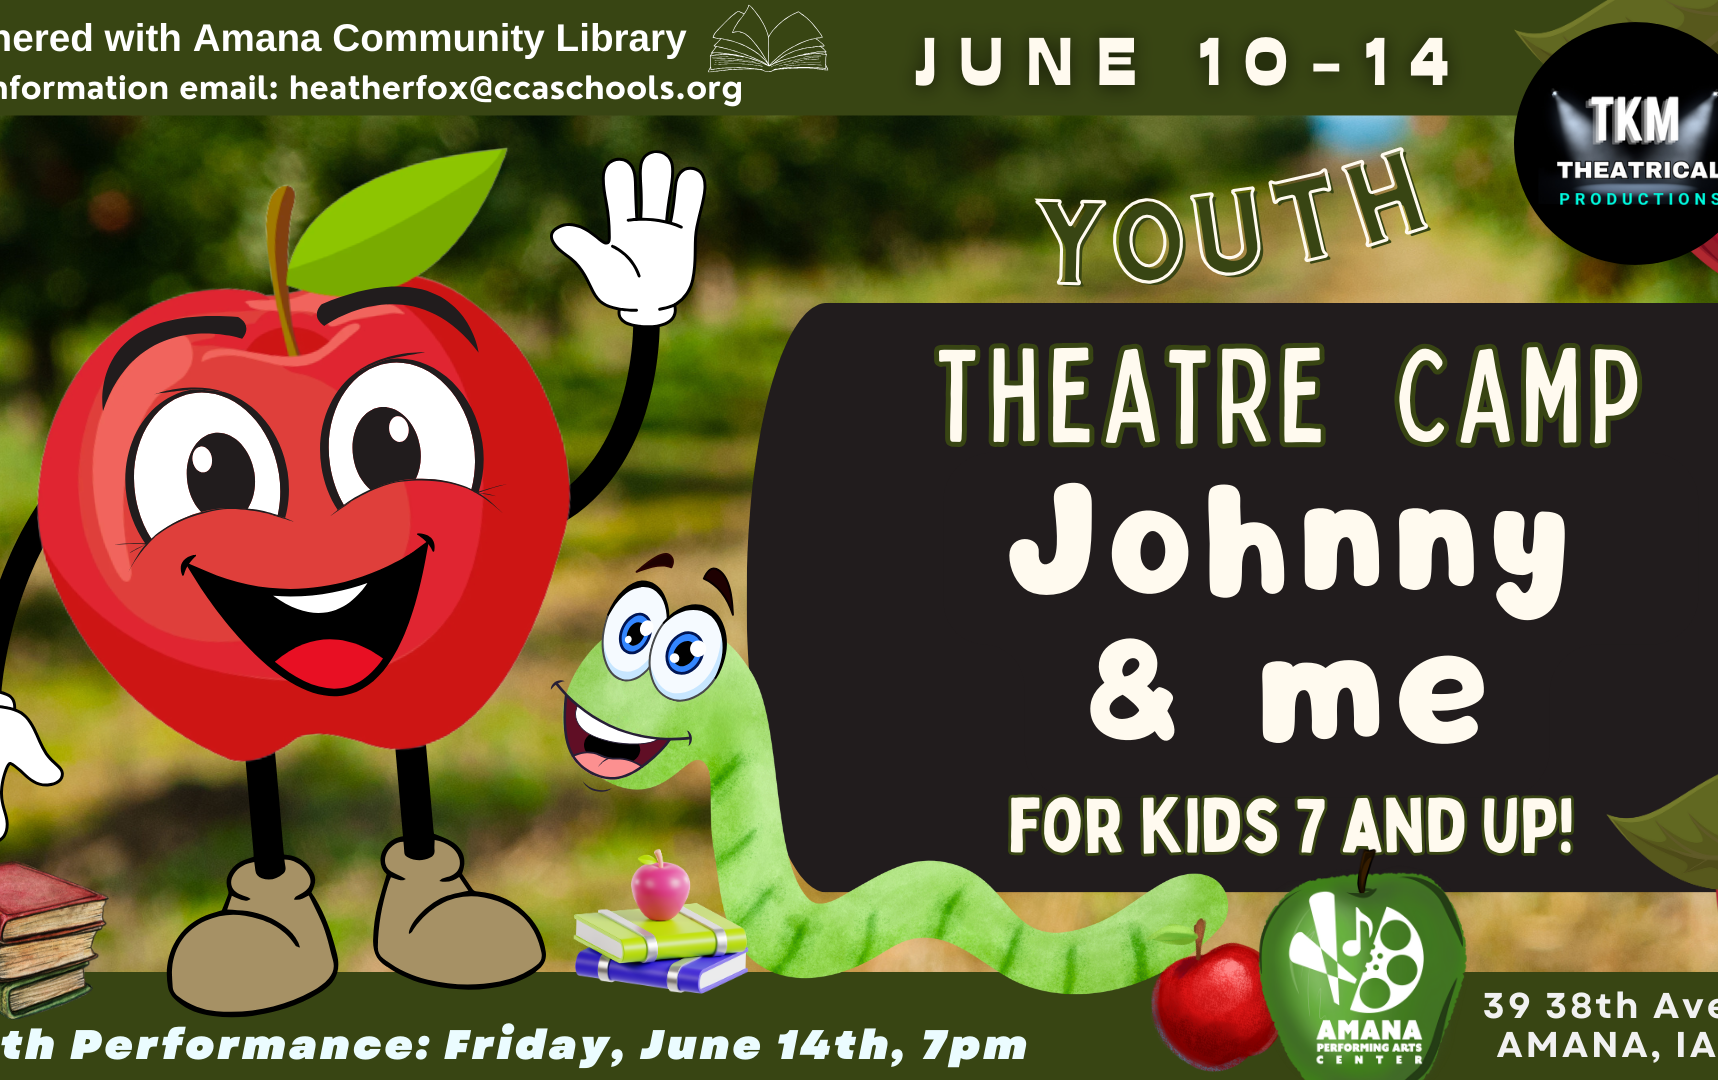 JOHNNY & ME Youth Theatre Camp Tickets | TKM Theatrical Productions